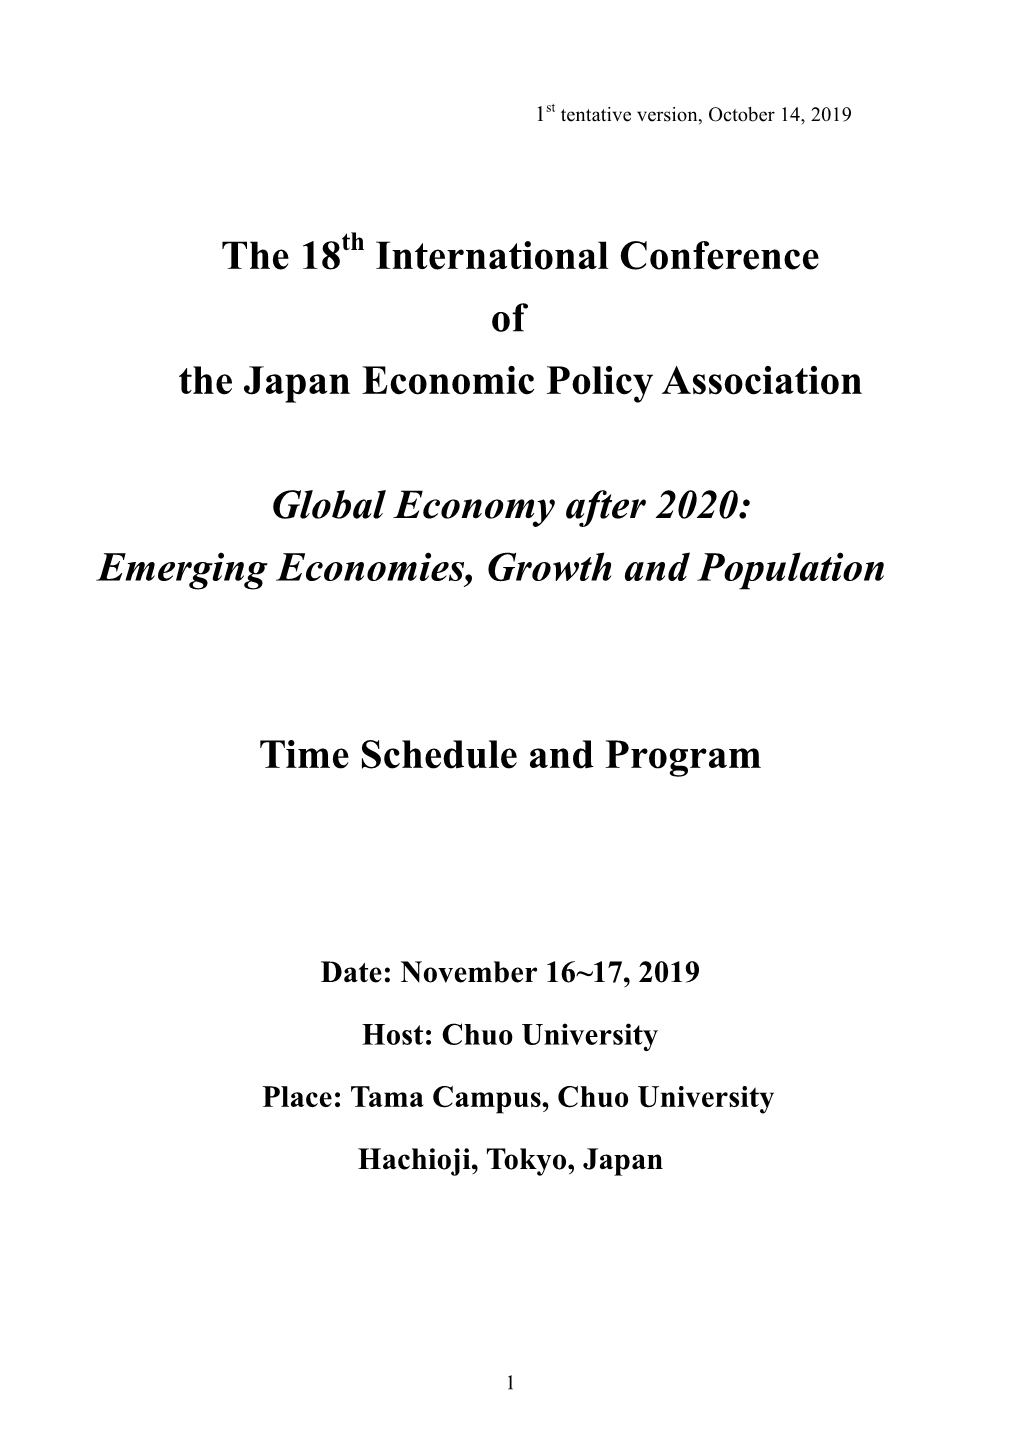 The 18 International Conference of the Japan Economic Policy Association